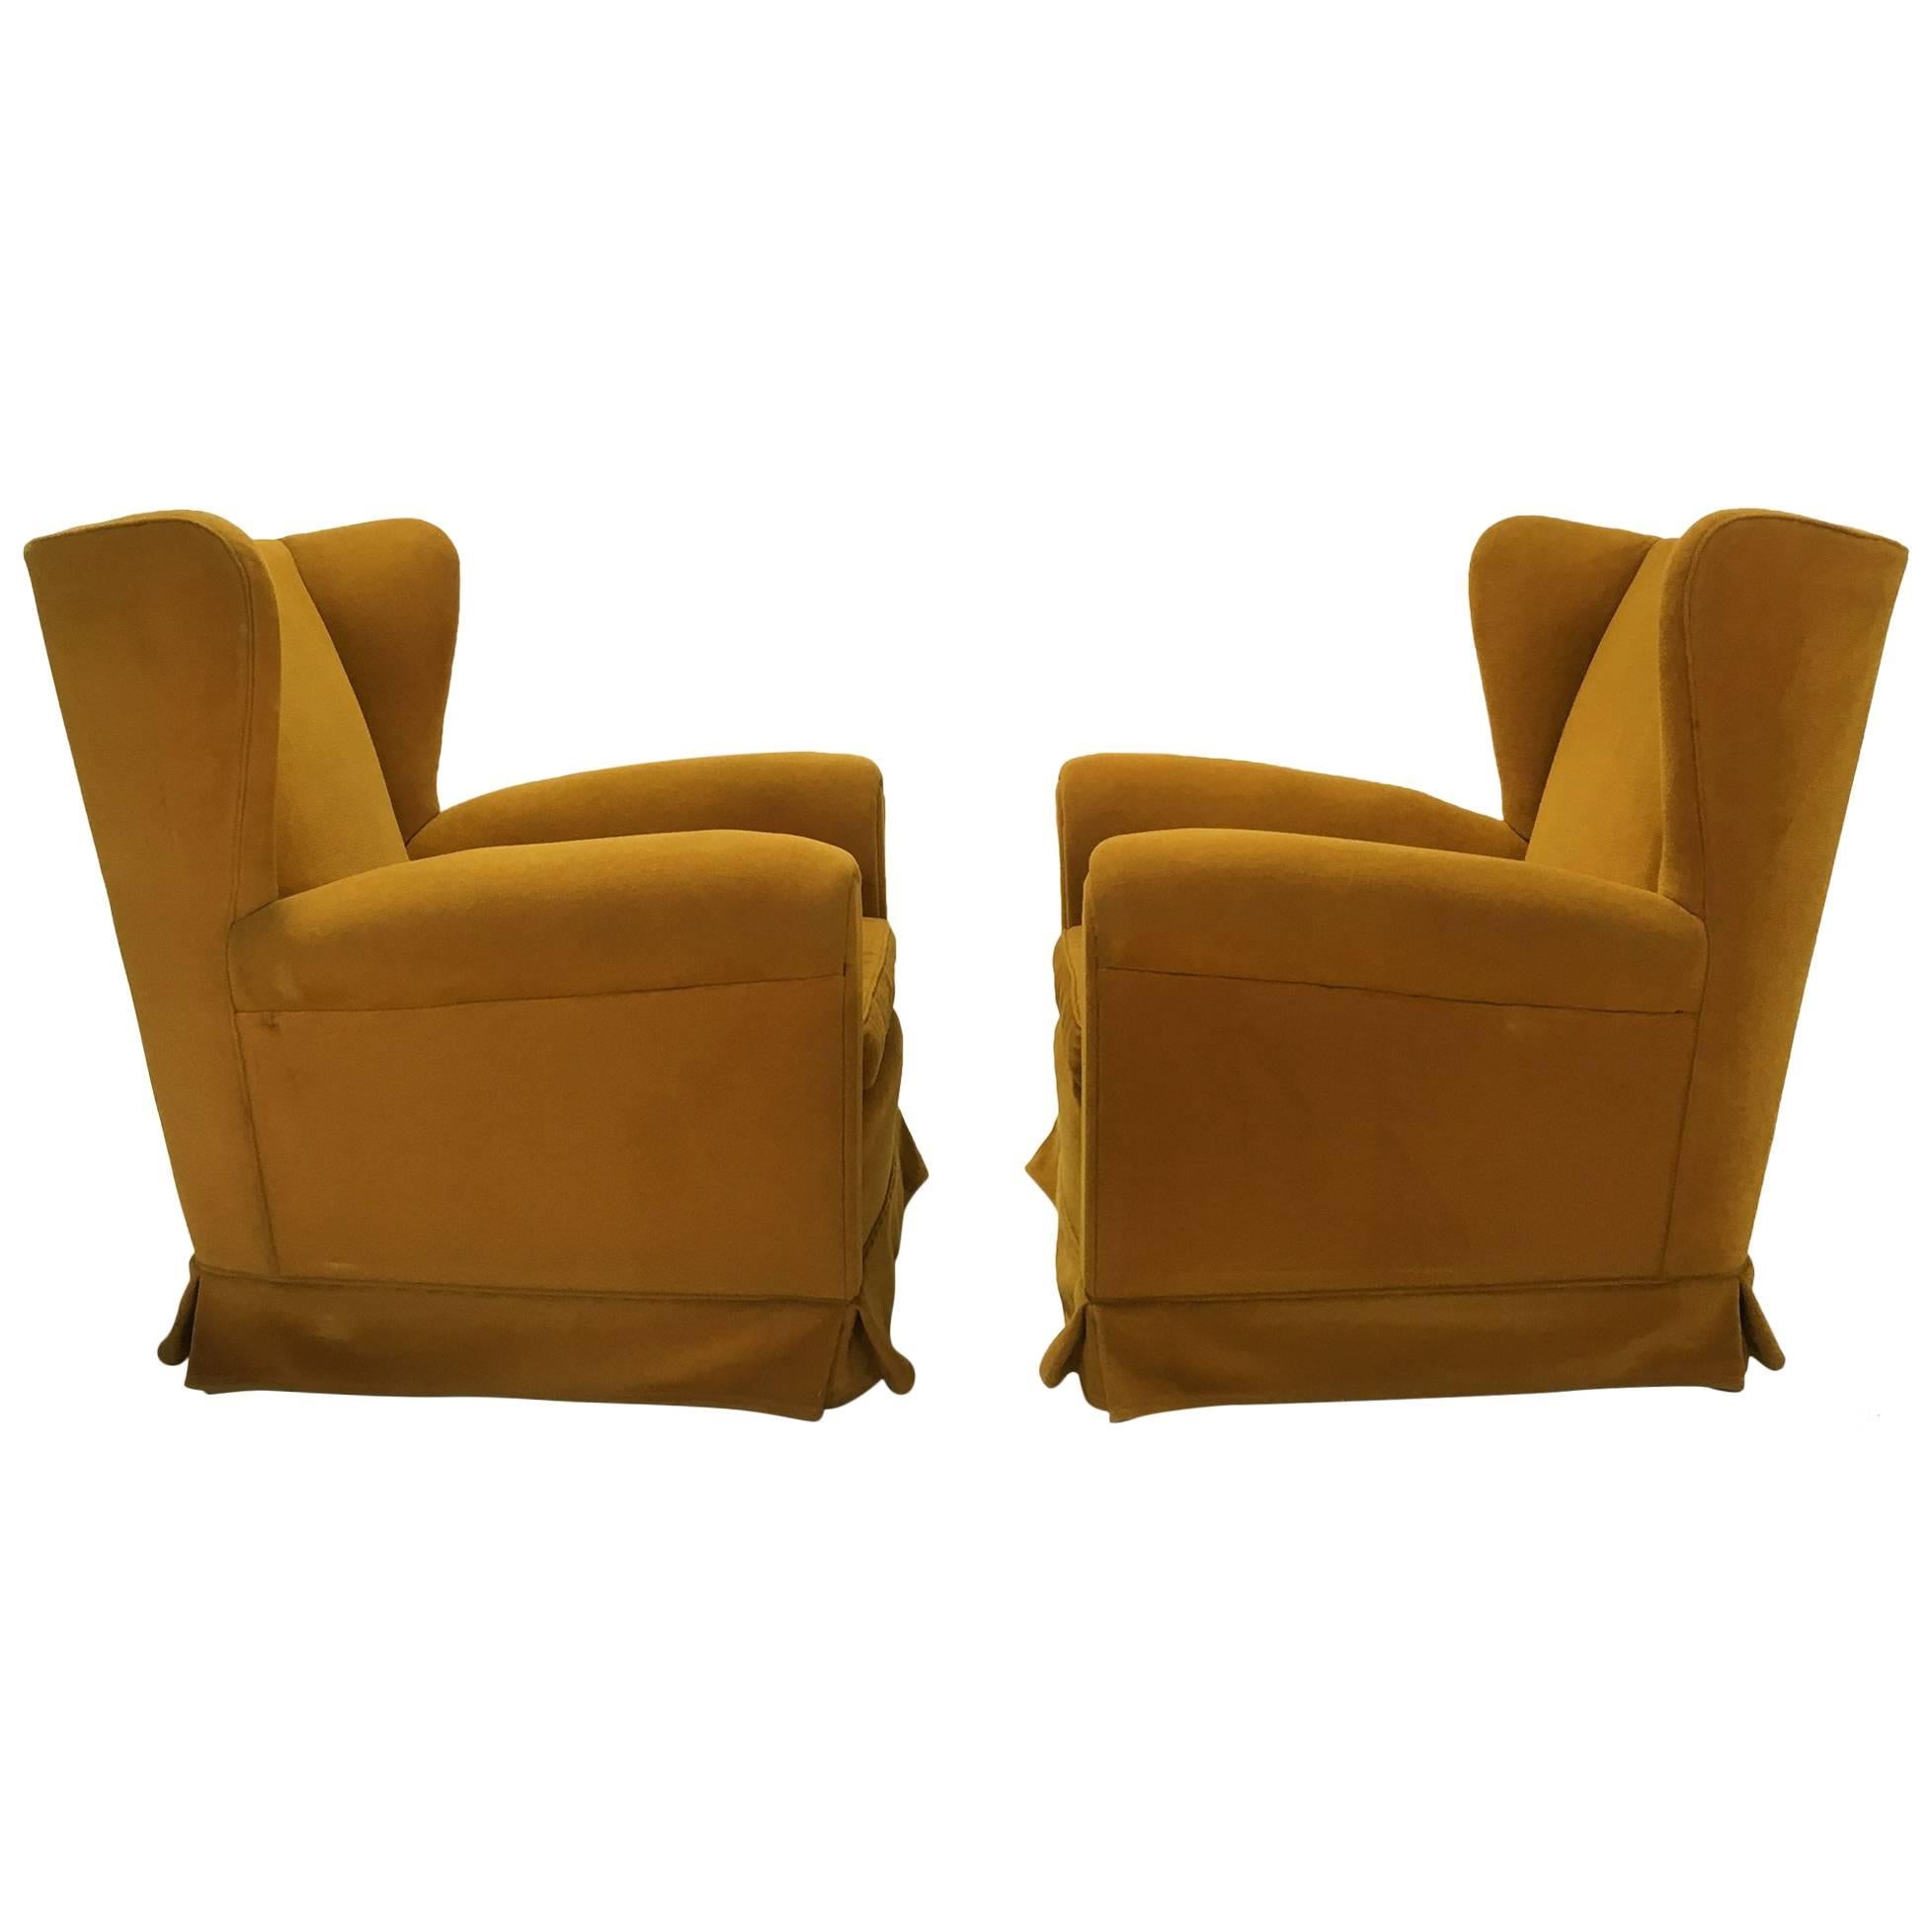 Italian Wing Back Lounge Chairs, Pair For Sale